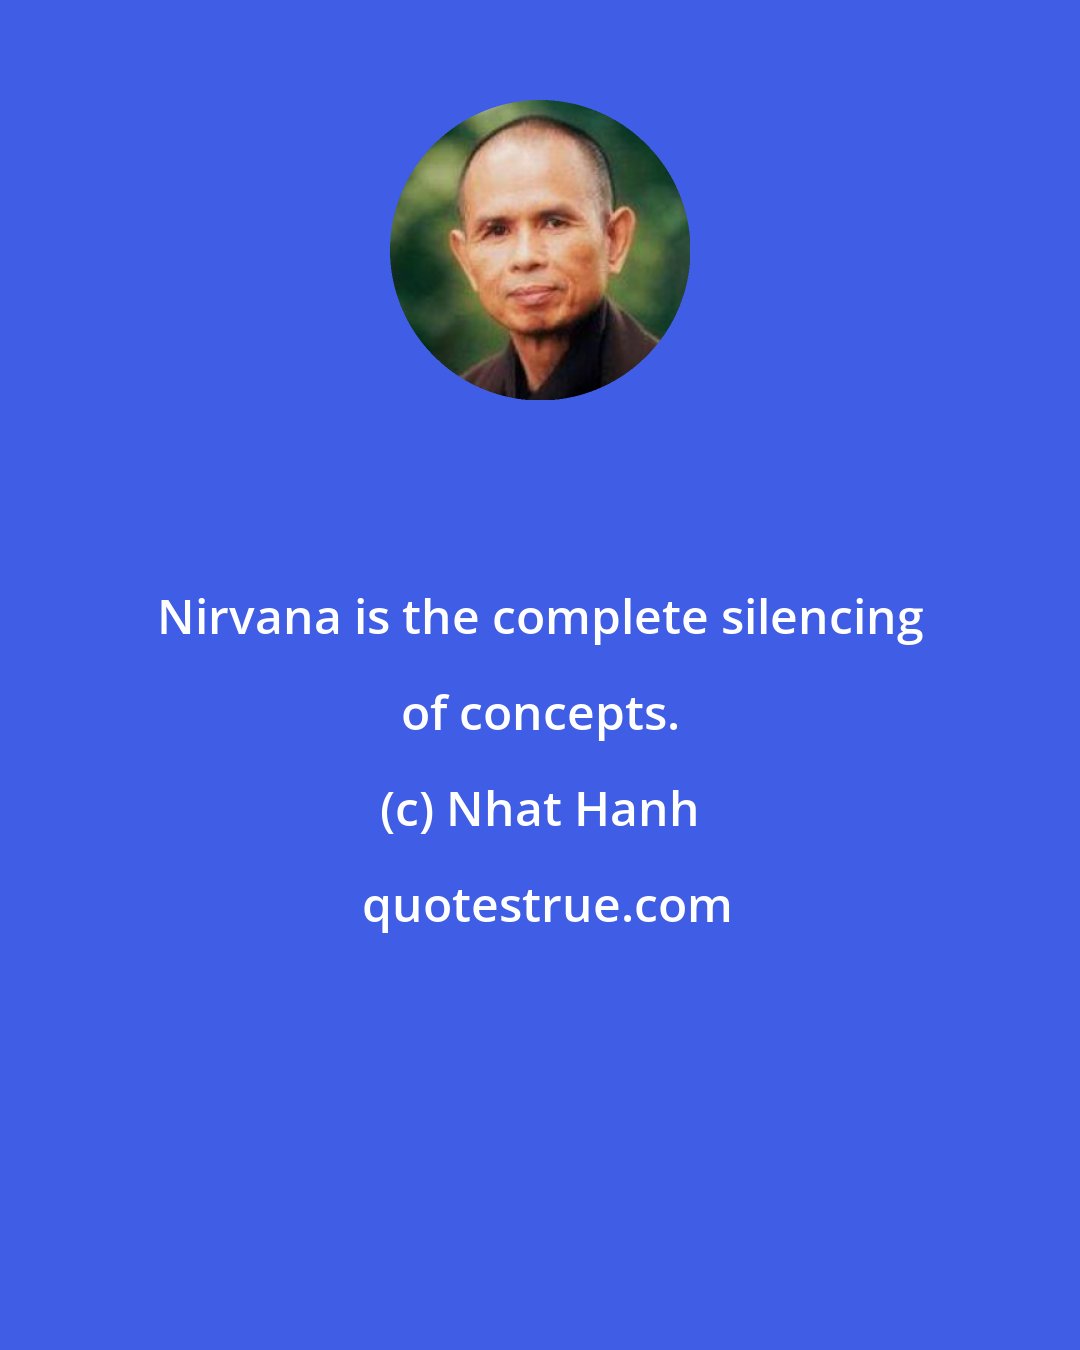 Nhat Hanh: Nirvana is the complete silencing of concepts.